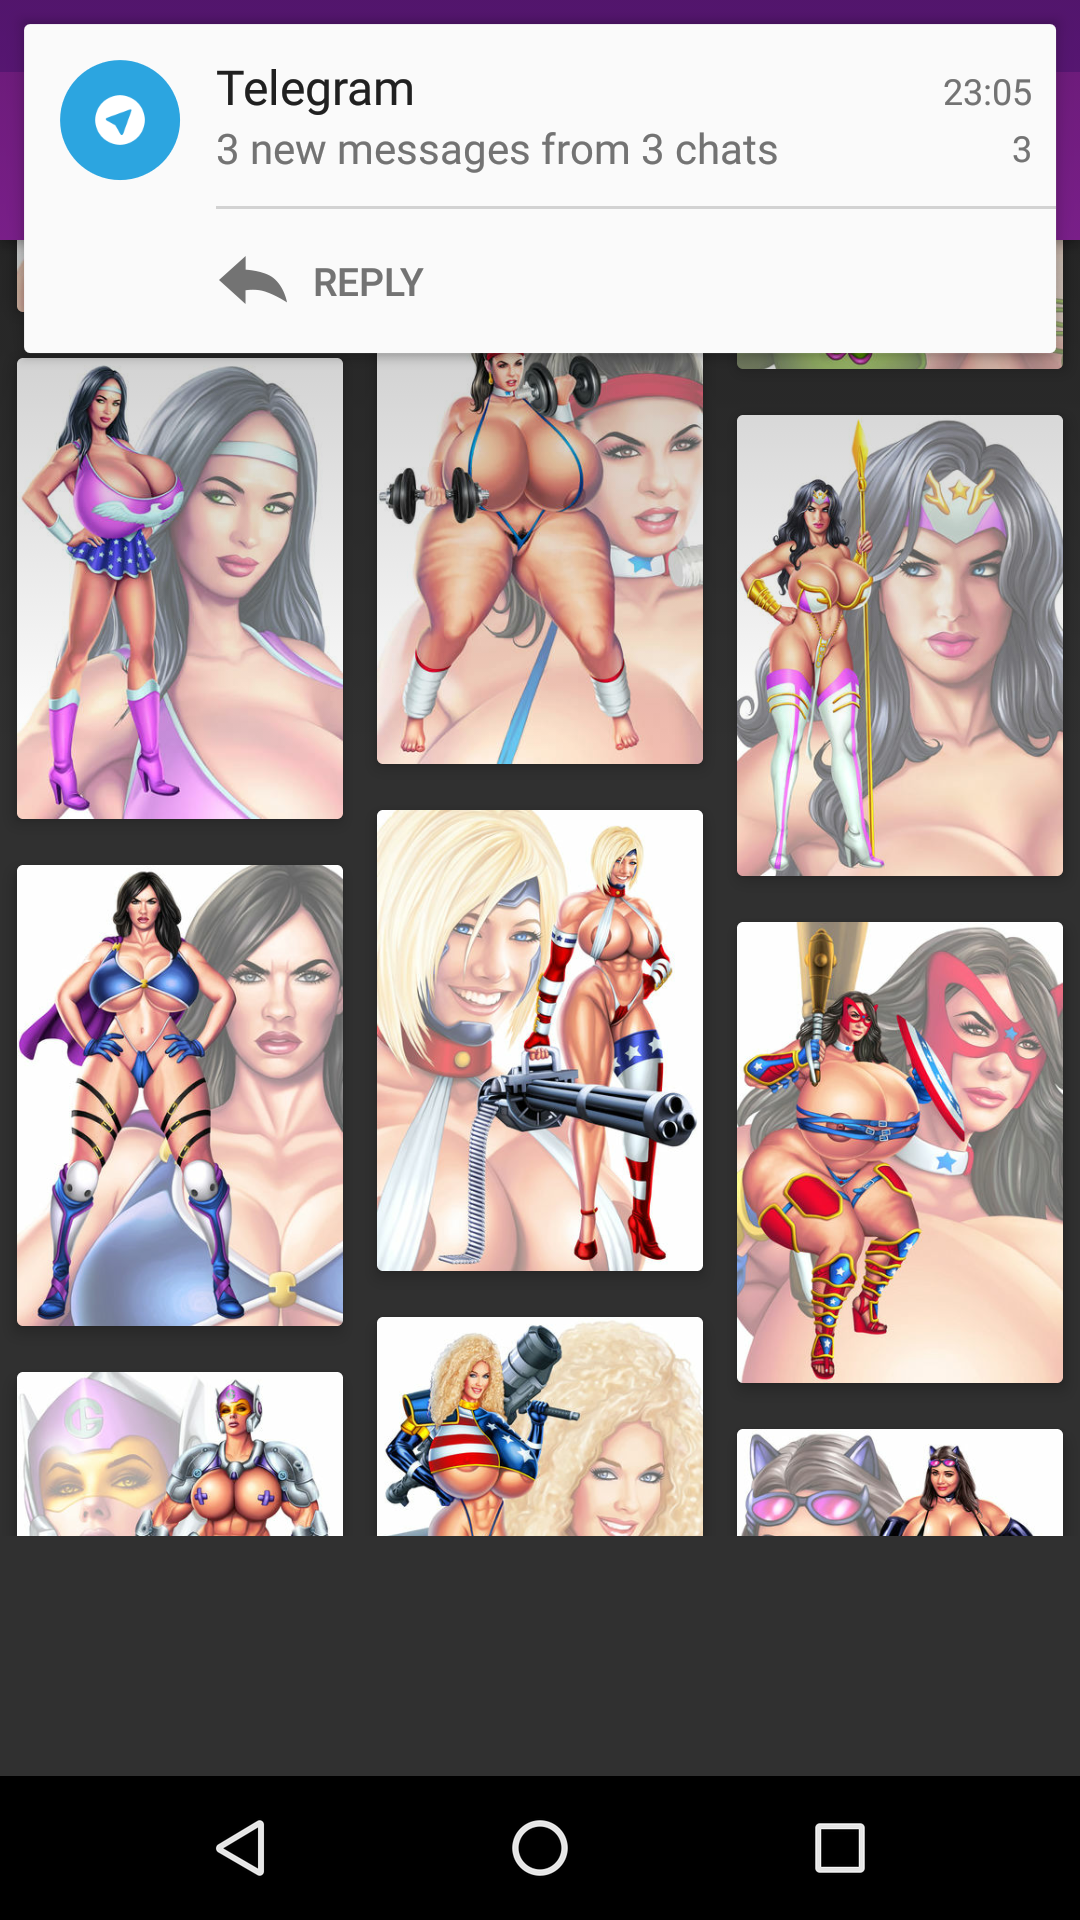 Superheroines download,erotic,topless,apk,superheroines,gallery,sexy,android,porn,free,photos,panties,hentai,wallpapers,collection,images,wallpaper,comics,hot,upskirt,image,app